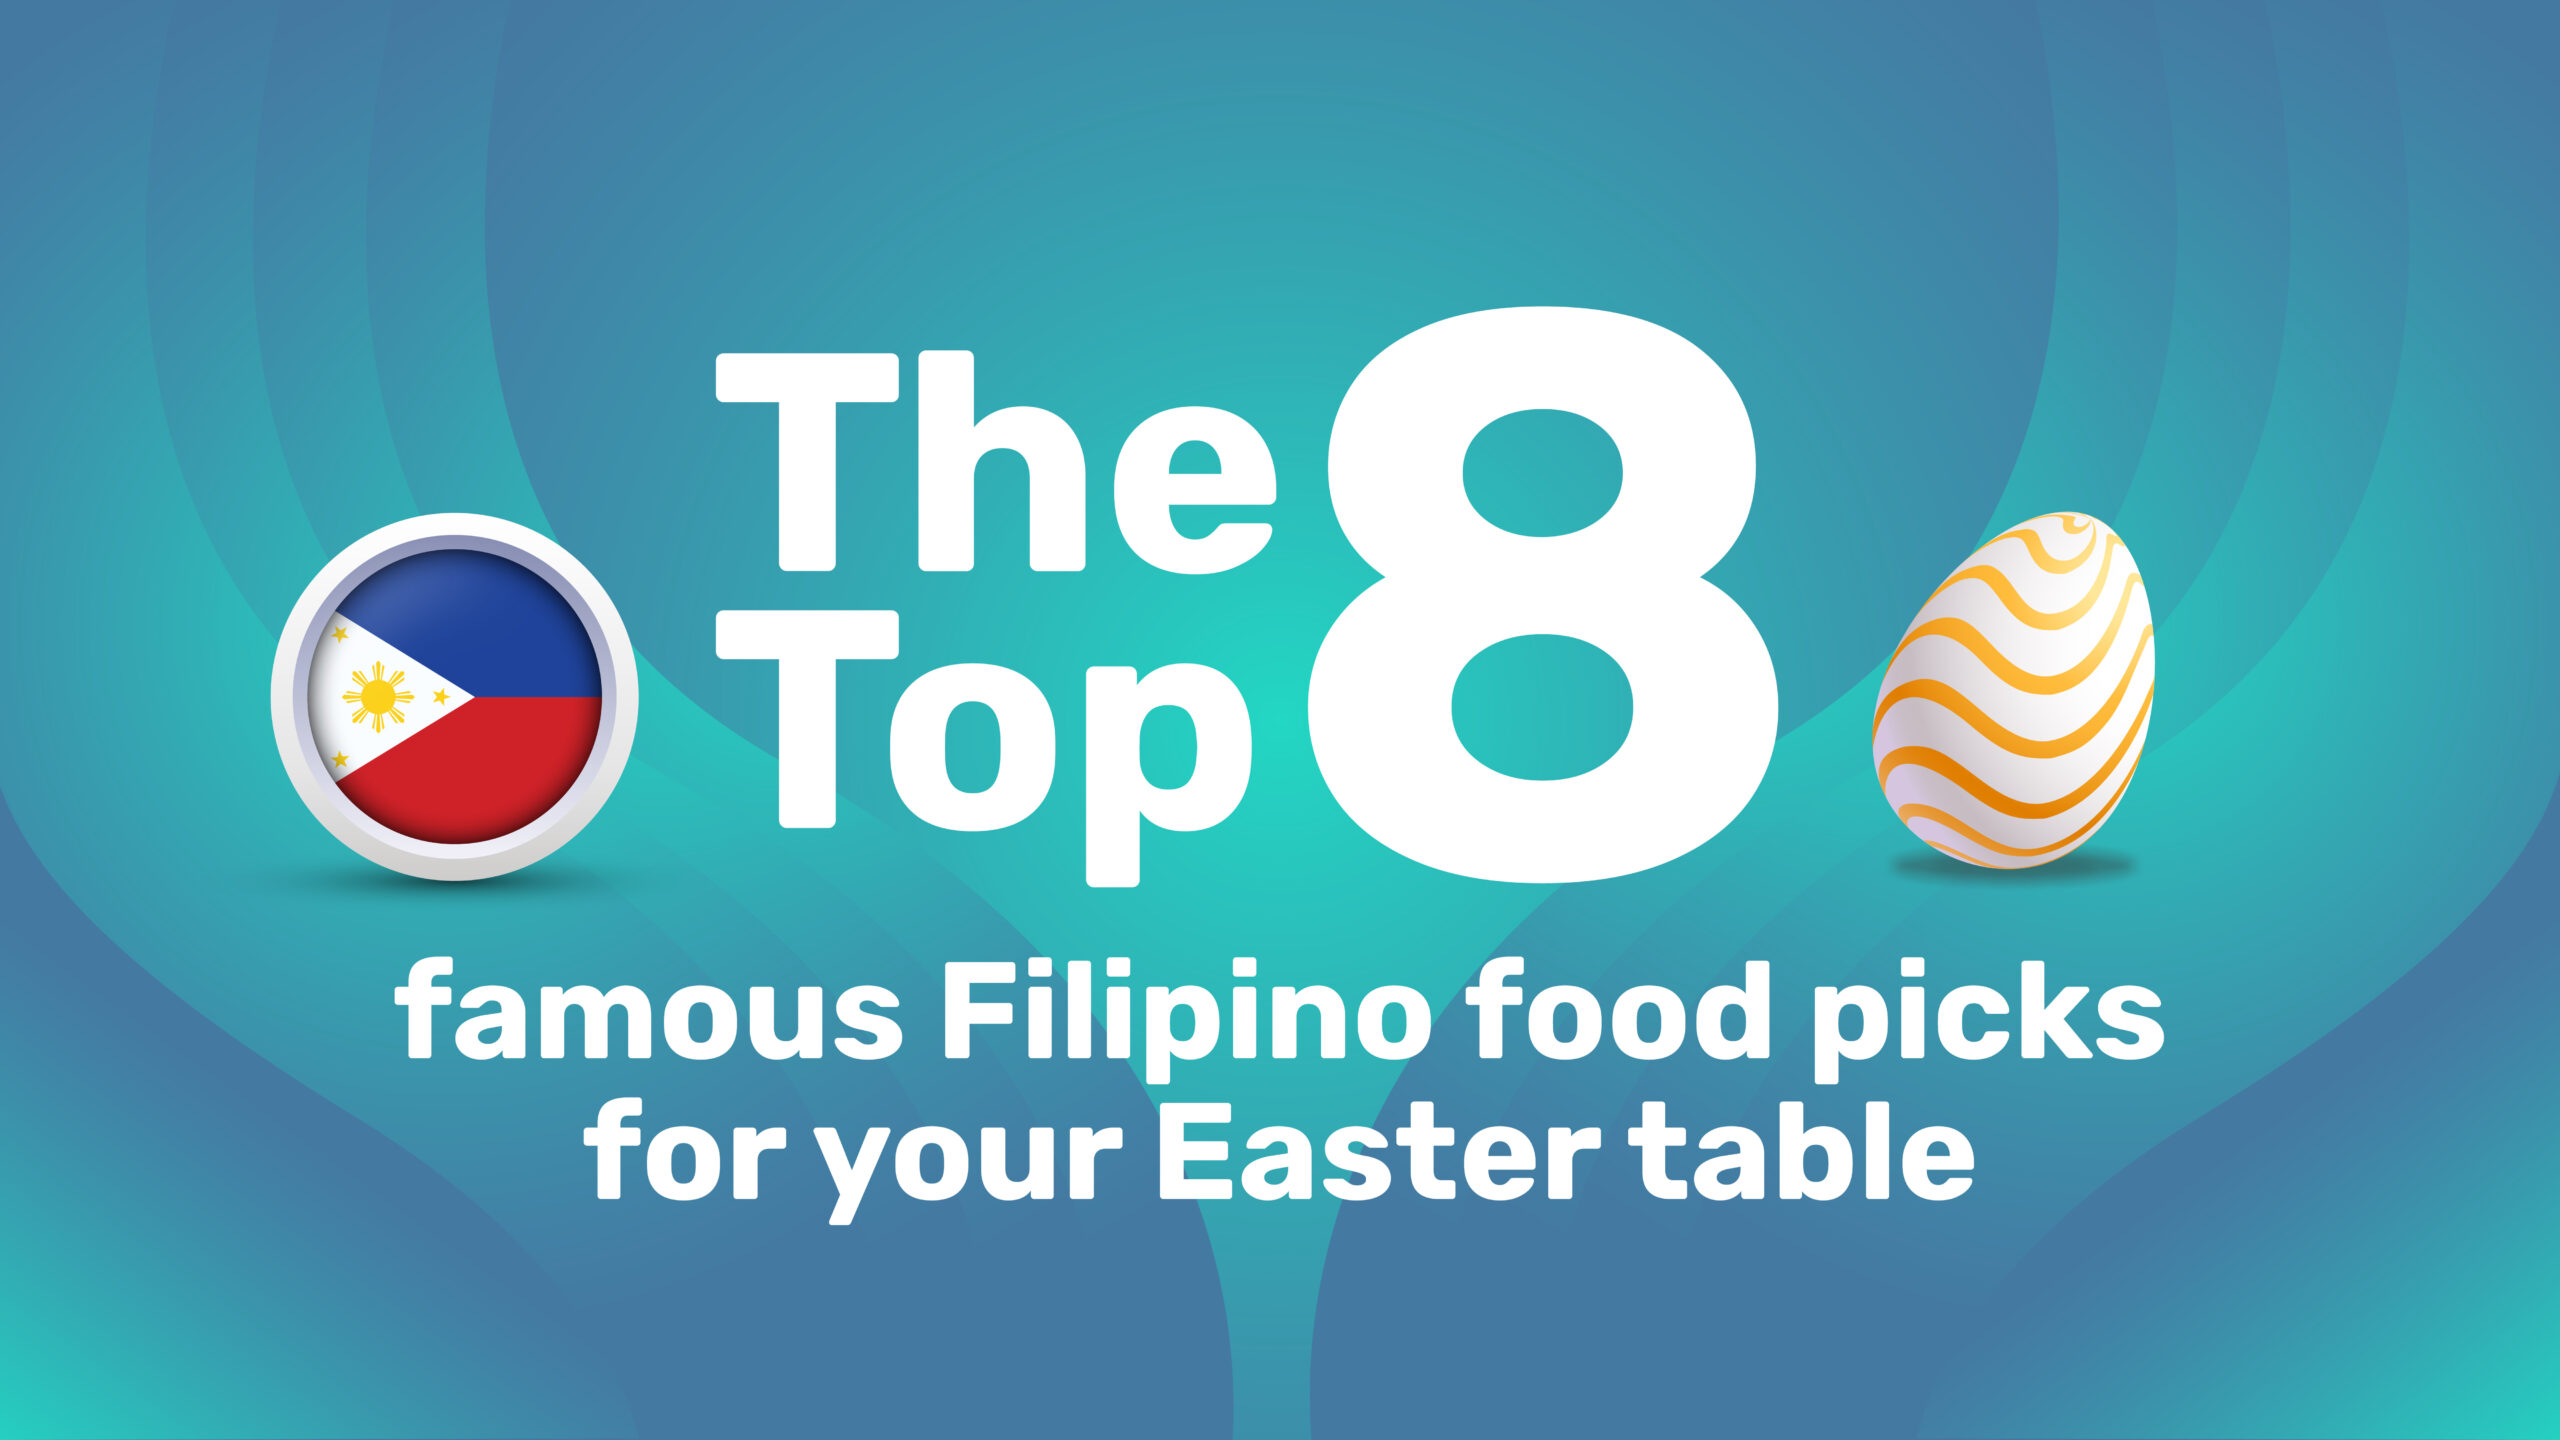 Title card for "The top 8 famous Filipino food picks for your Easter table"